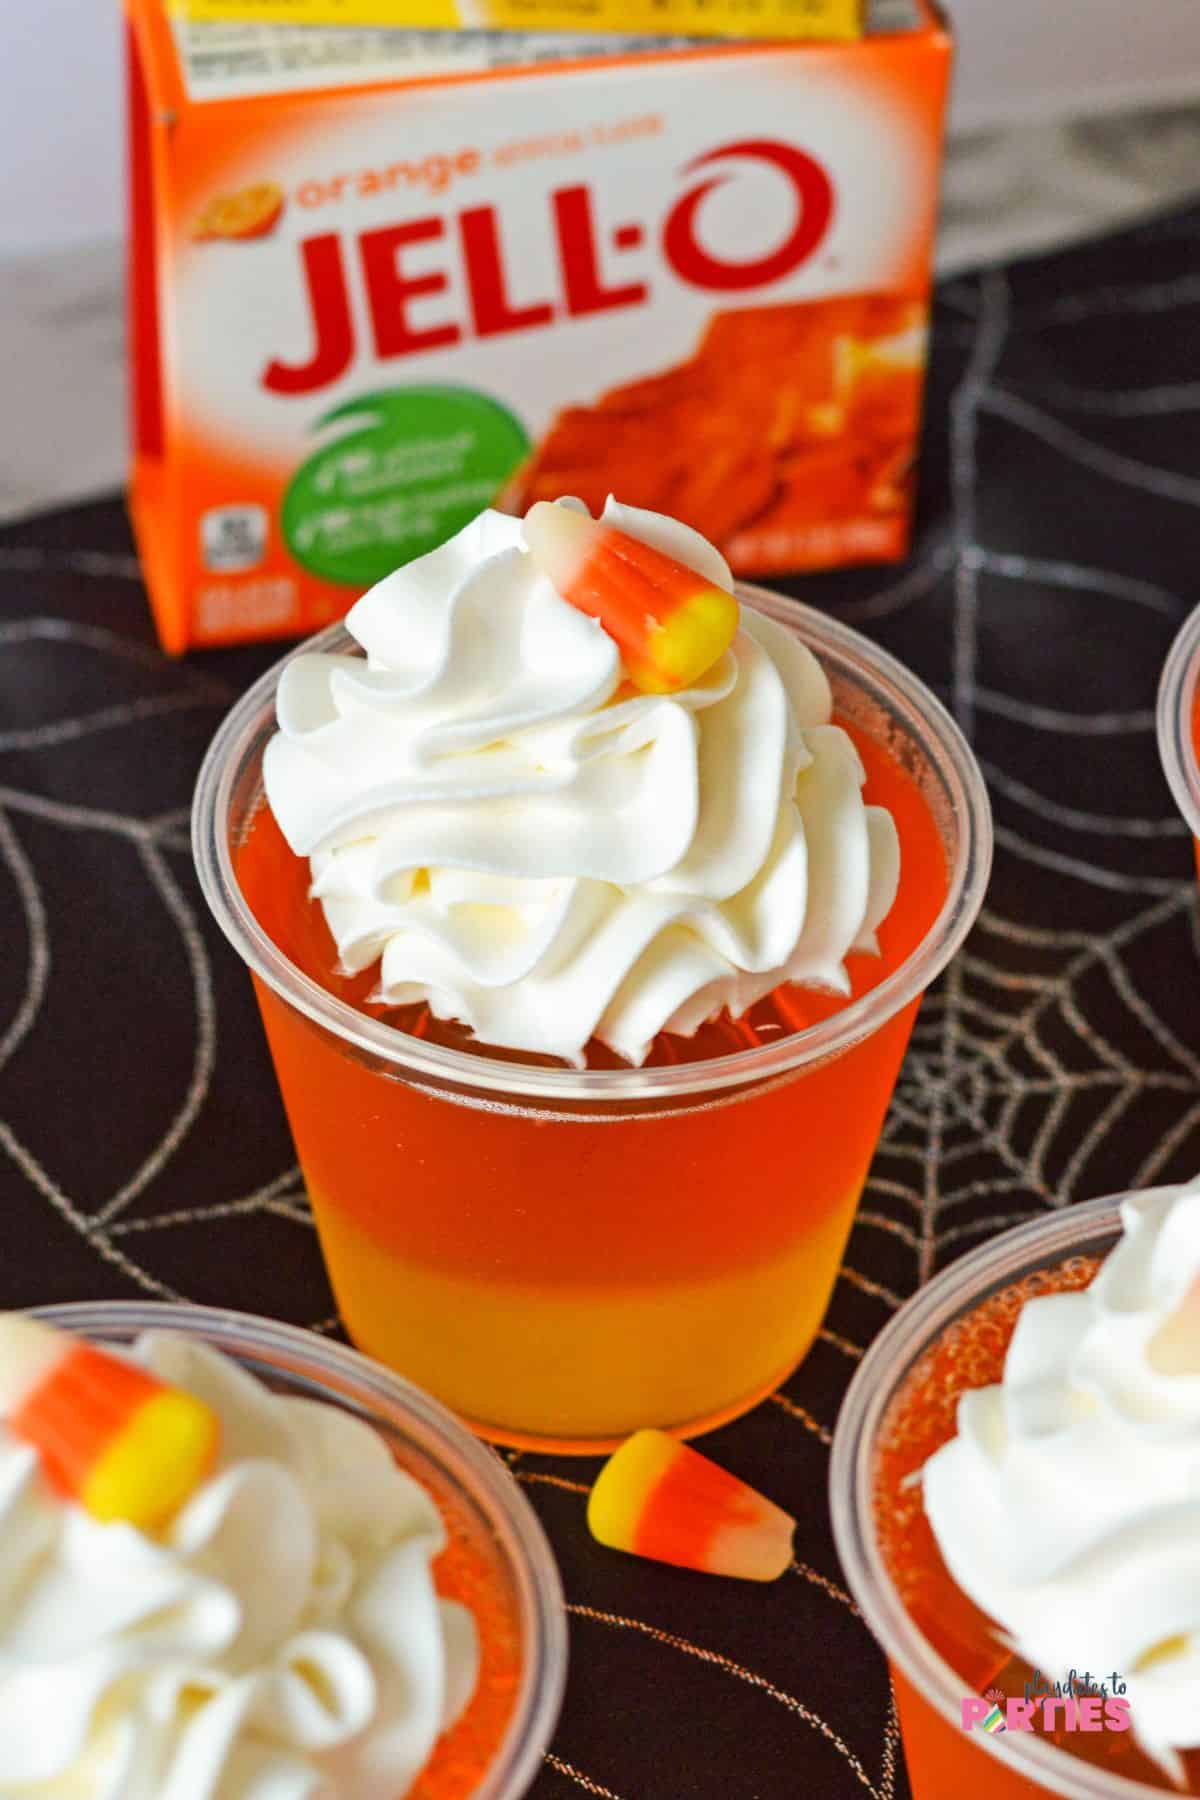 A plastic cup with layers of yellow and orange jello topped with whipped cream.